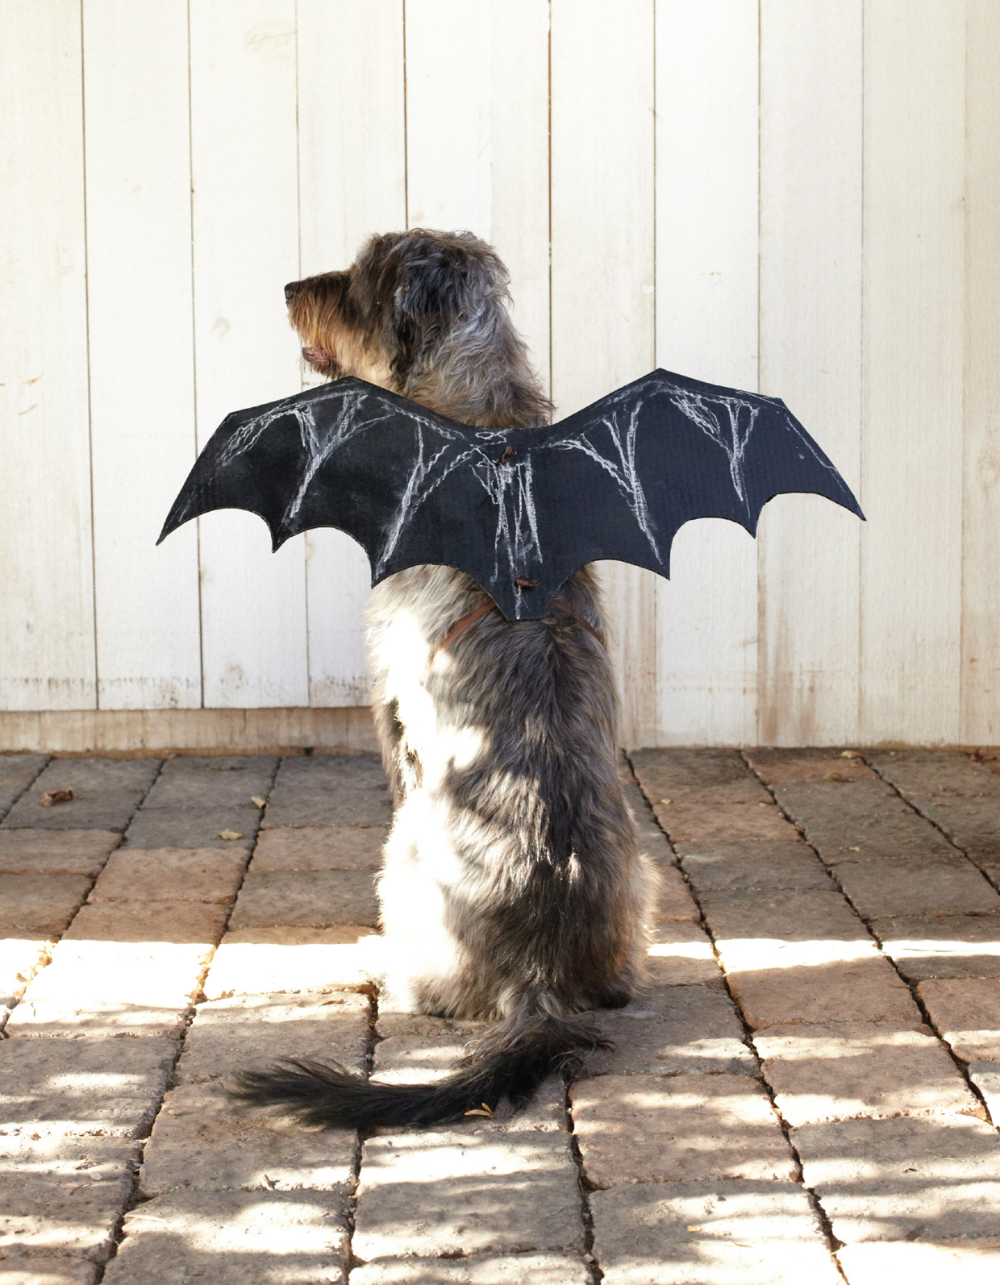 How to Make a Bat Halloween Costume for Your Dog - How to Make a Bat Halloween Costume for Your Dog -   16 diy Dog costume ideas